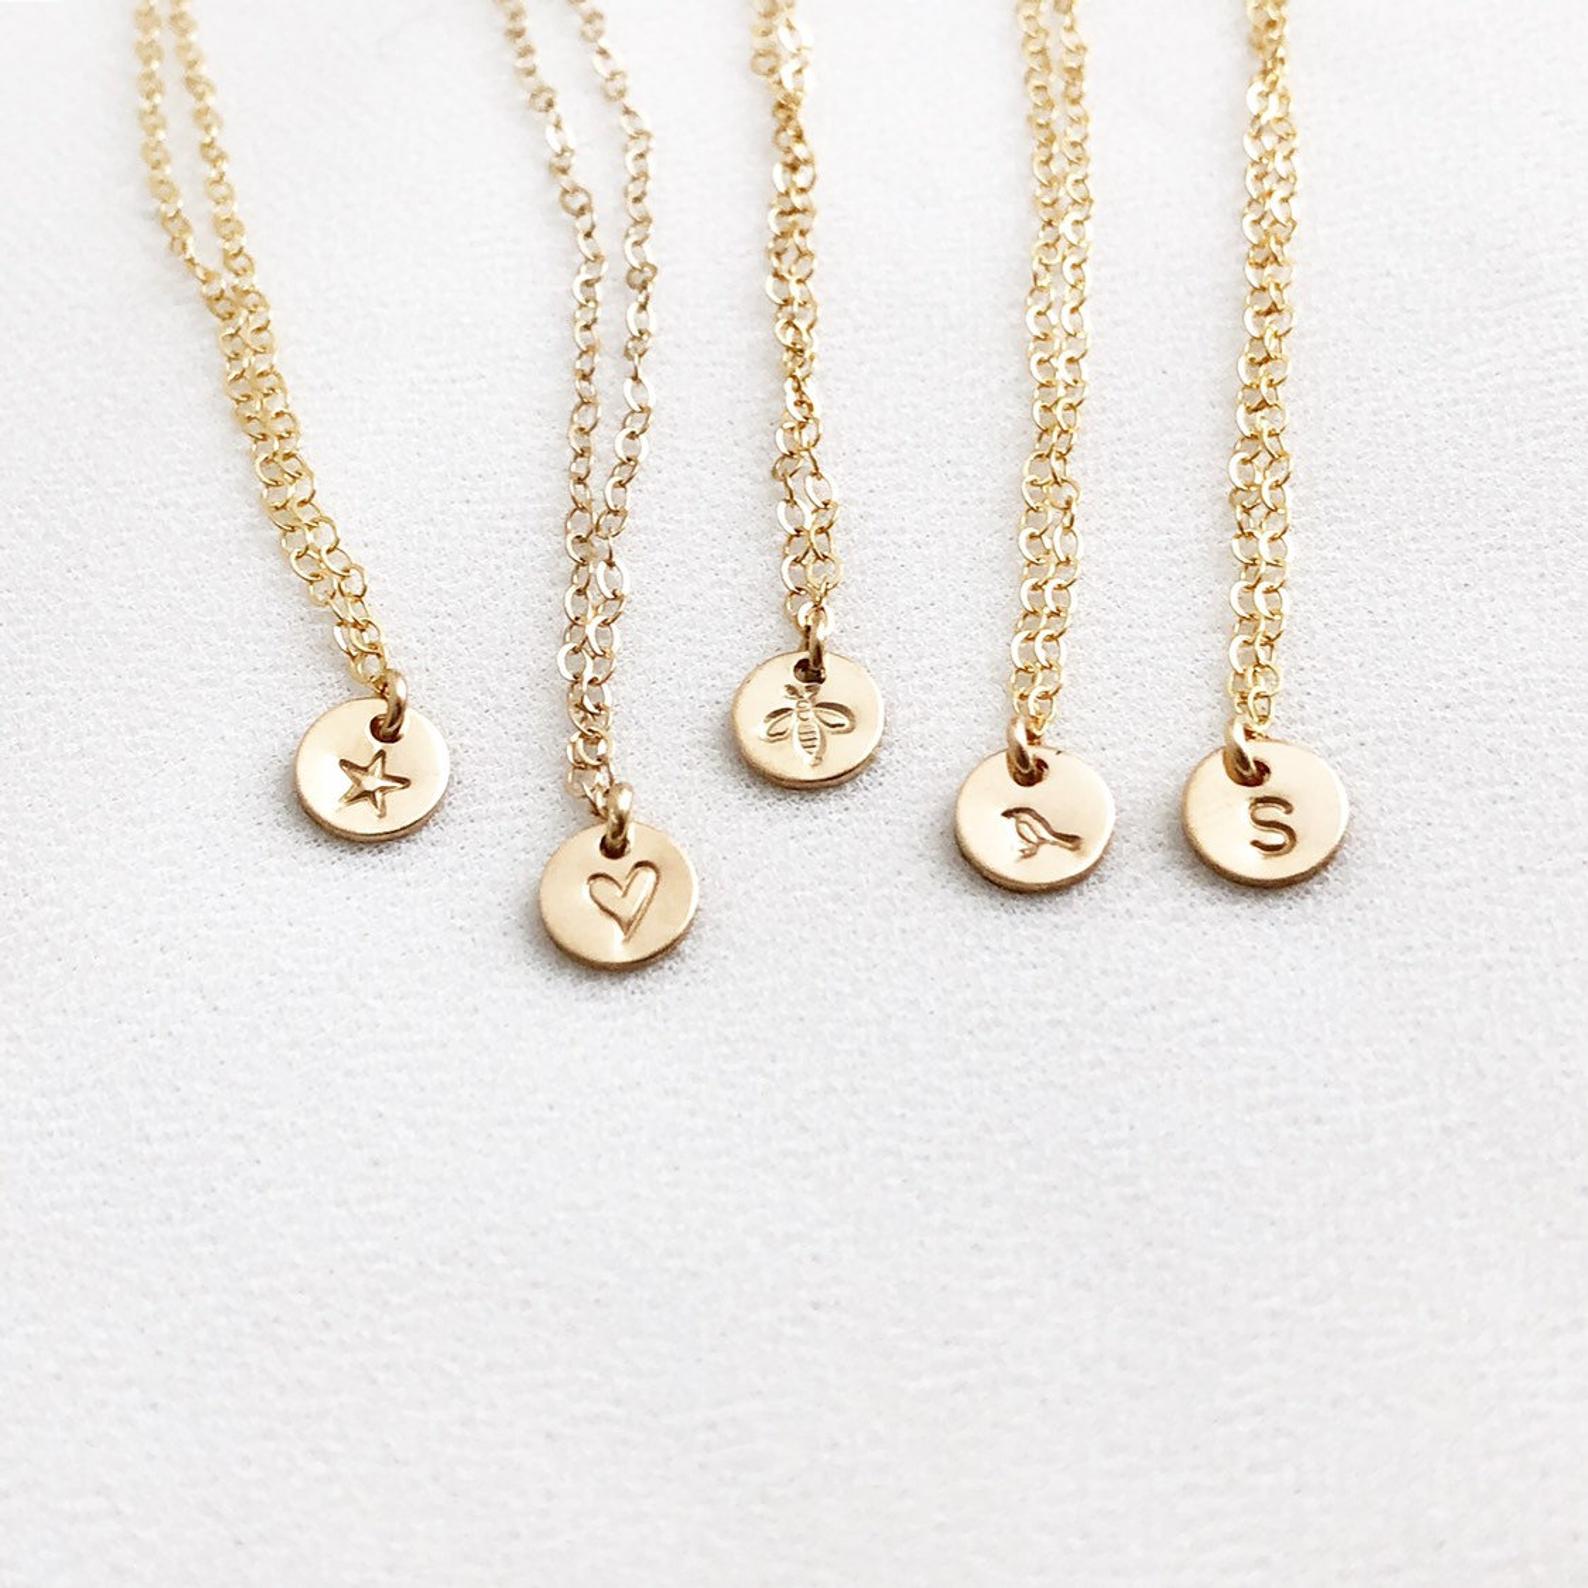 Personalized Jewelry, Personalized Gifts, Coin Necklace, Disc necklace Minimalist Jewelry, Everyday Jewelry, Graduation Gifts, Teachers Gift Ideas